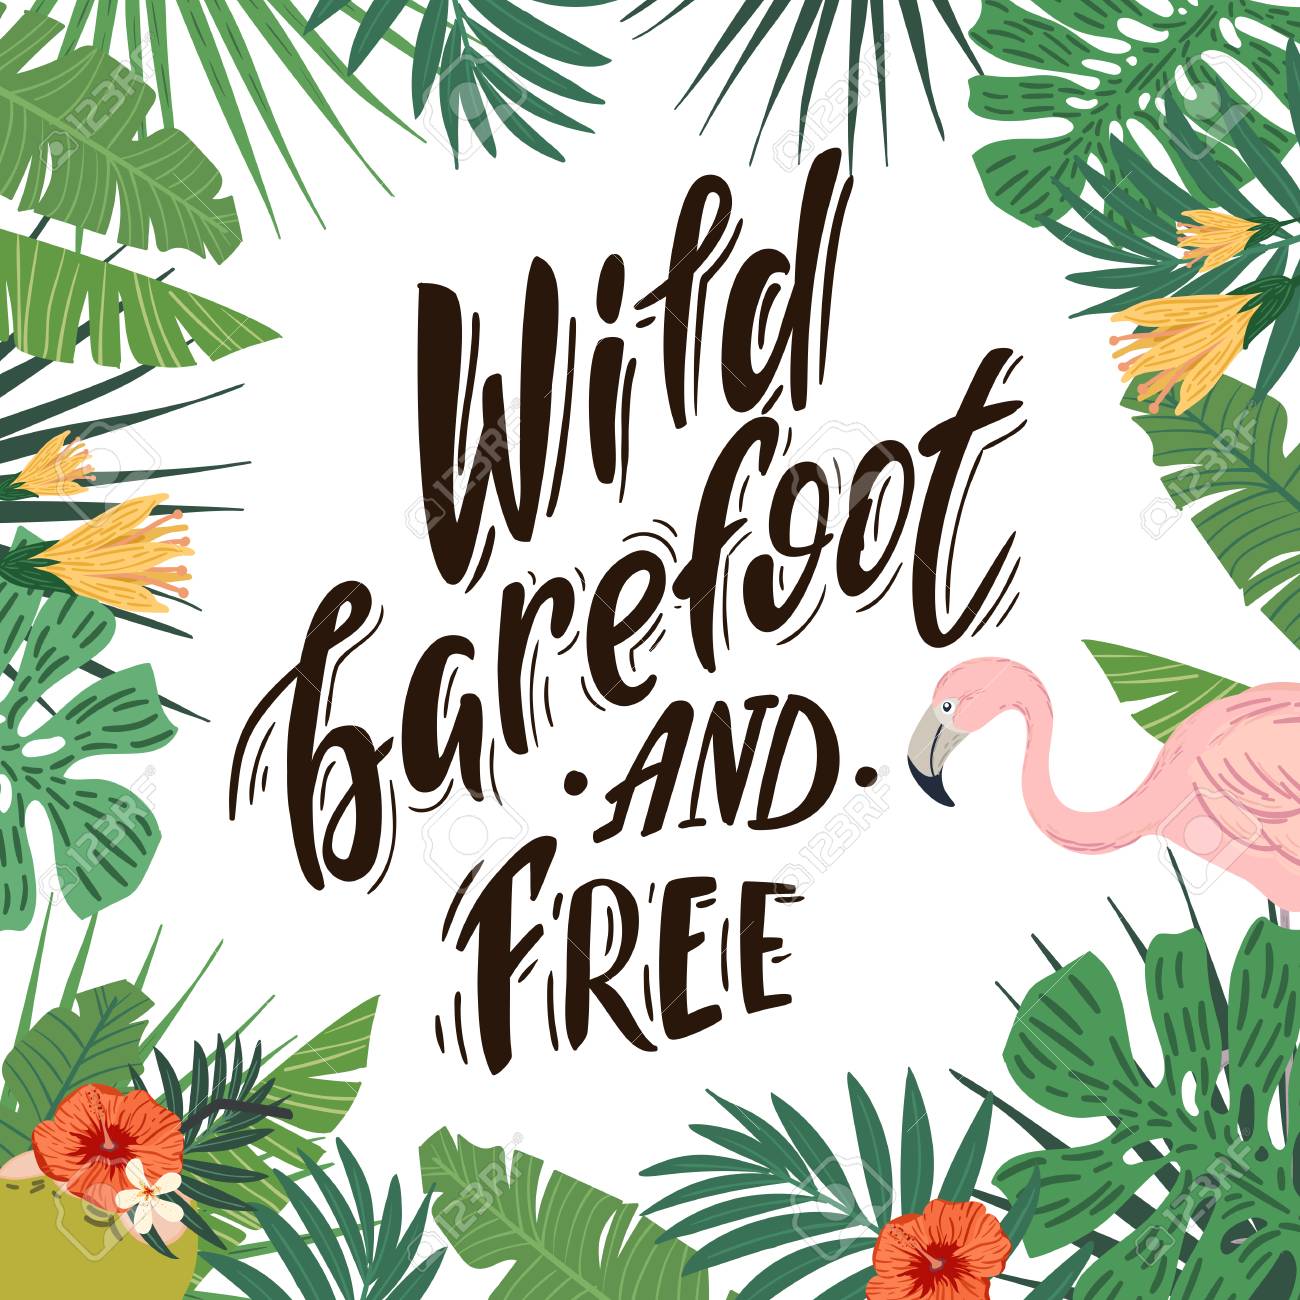 Wild Barefoot And Free Hand Drawn Lettering On Tropical